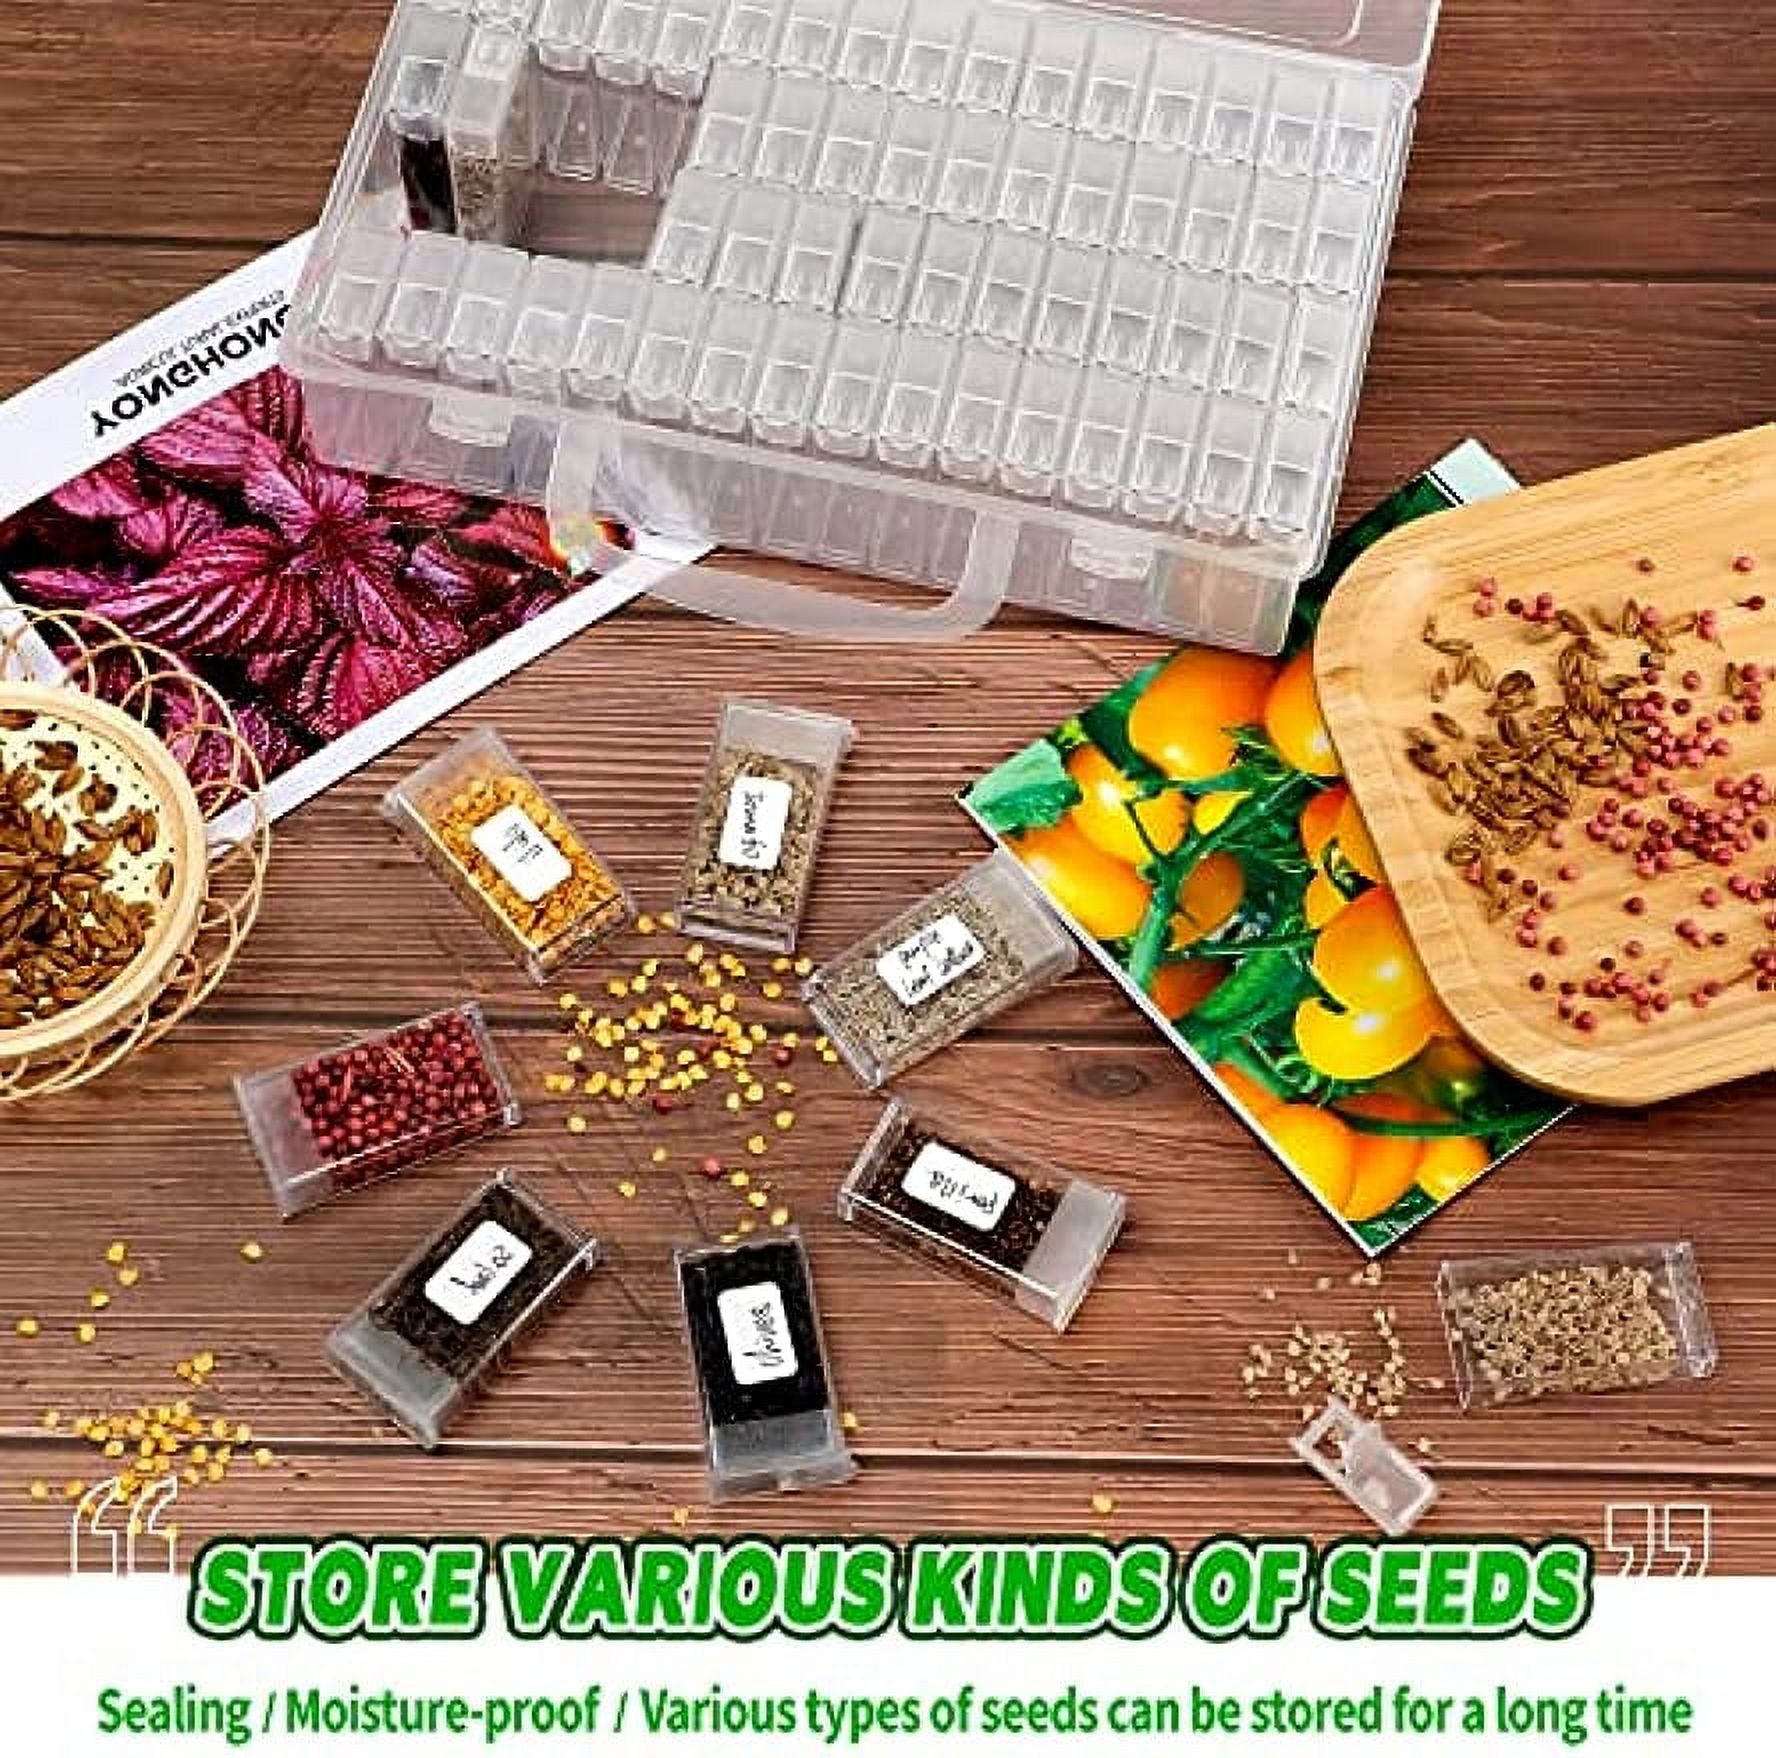 64 Slots Plastic Seed Storage Box Organizer with Label Stickers(seeds not  included), Seed Container Storage use for Flower Seeds,Vegetable Seeds,  Clover Seeds, Basil Seeds, Tomato Seeds 